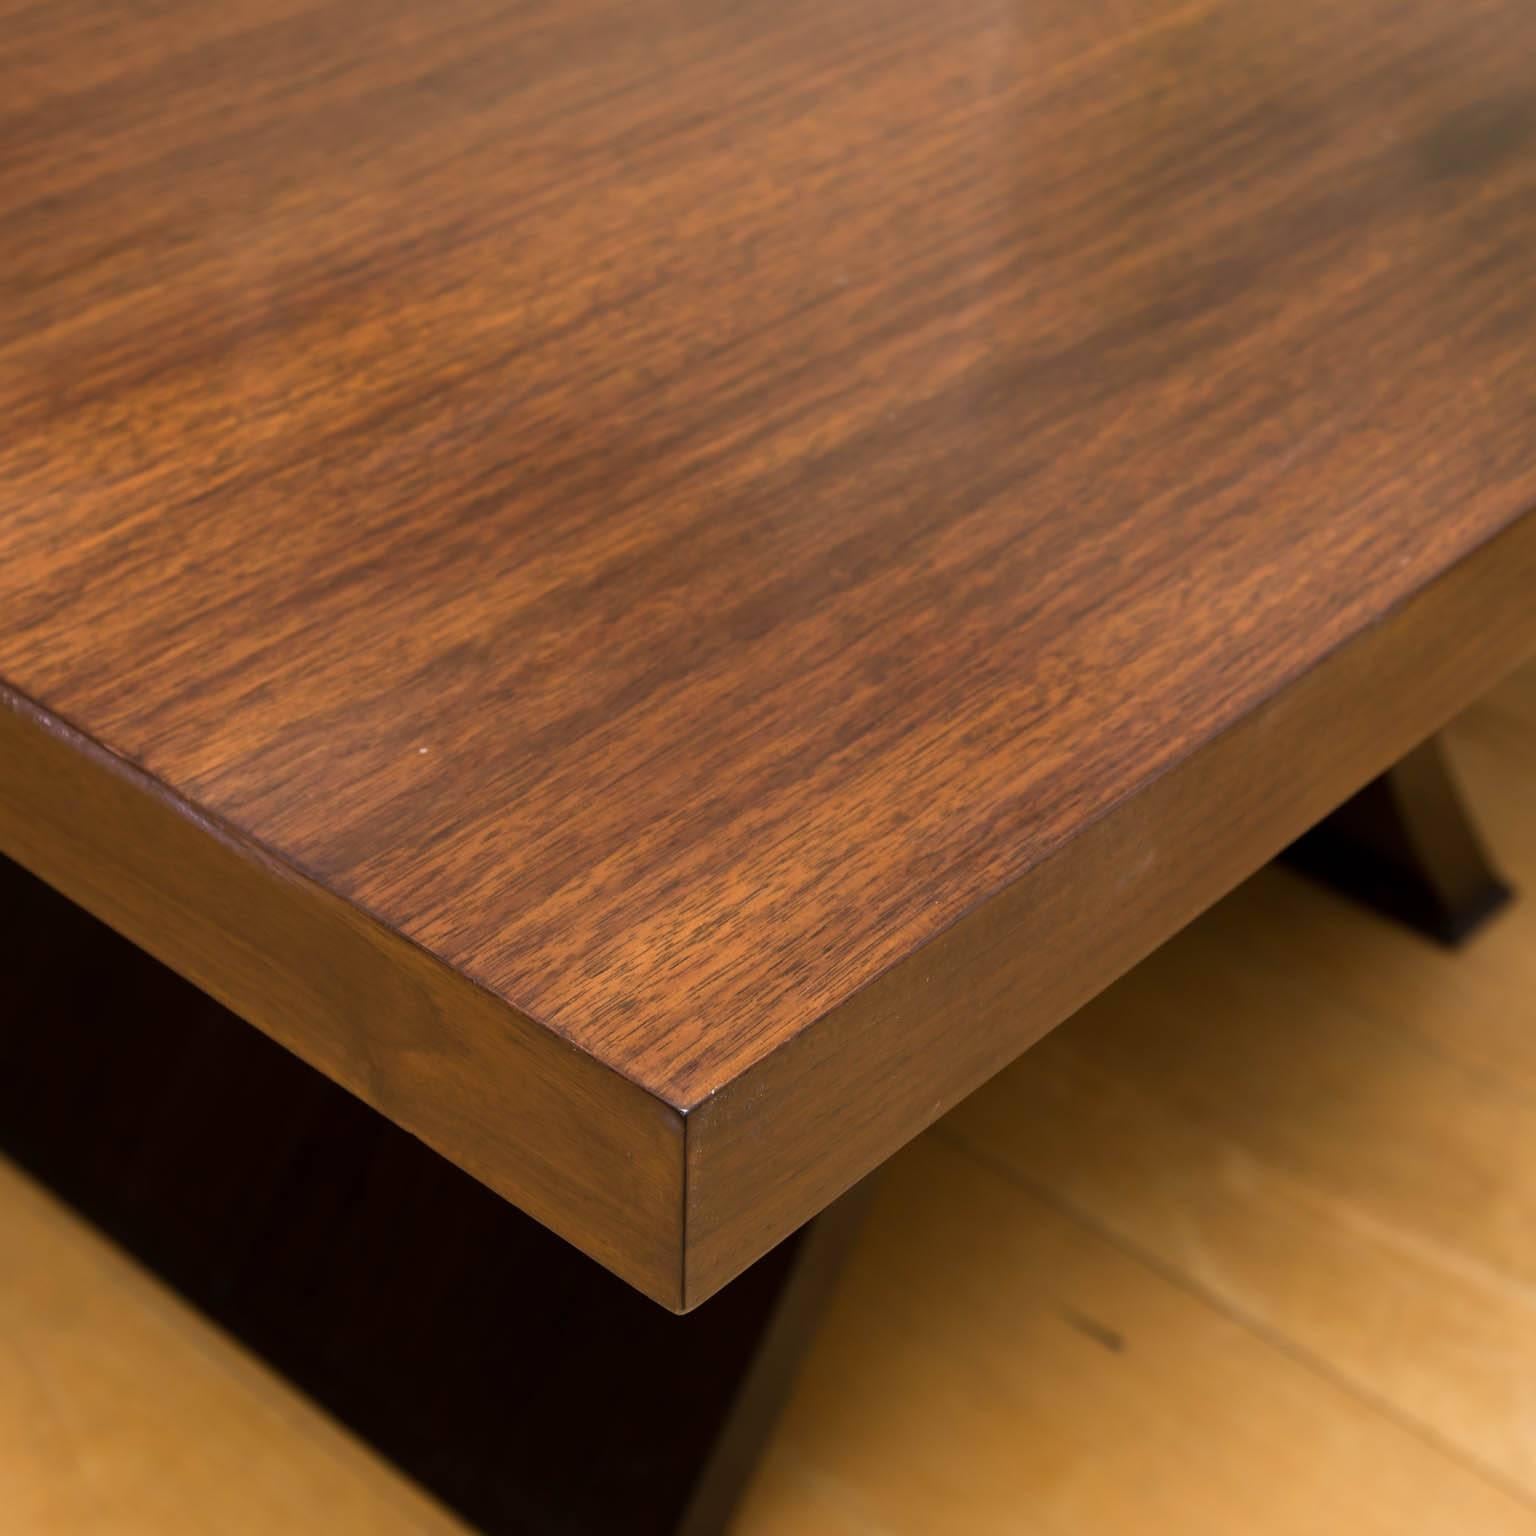 Bookmatched walnut veneers and bentwood pedestals make this dining table stand out from the norm.